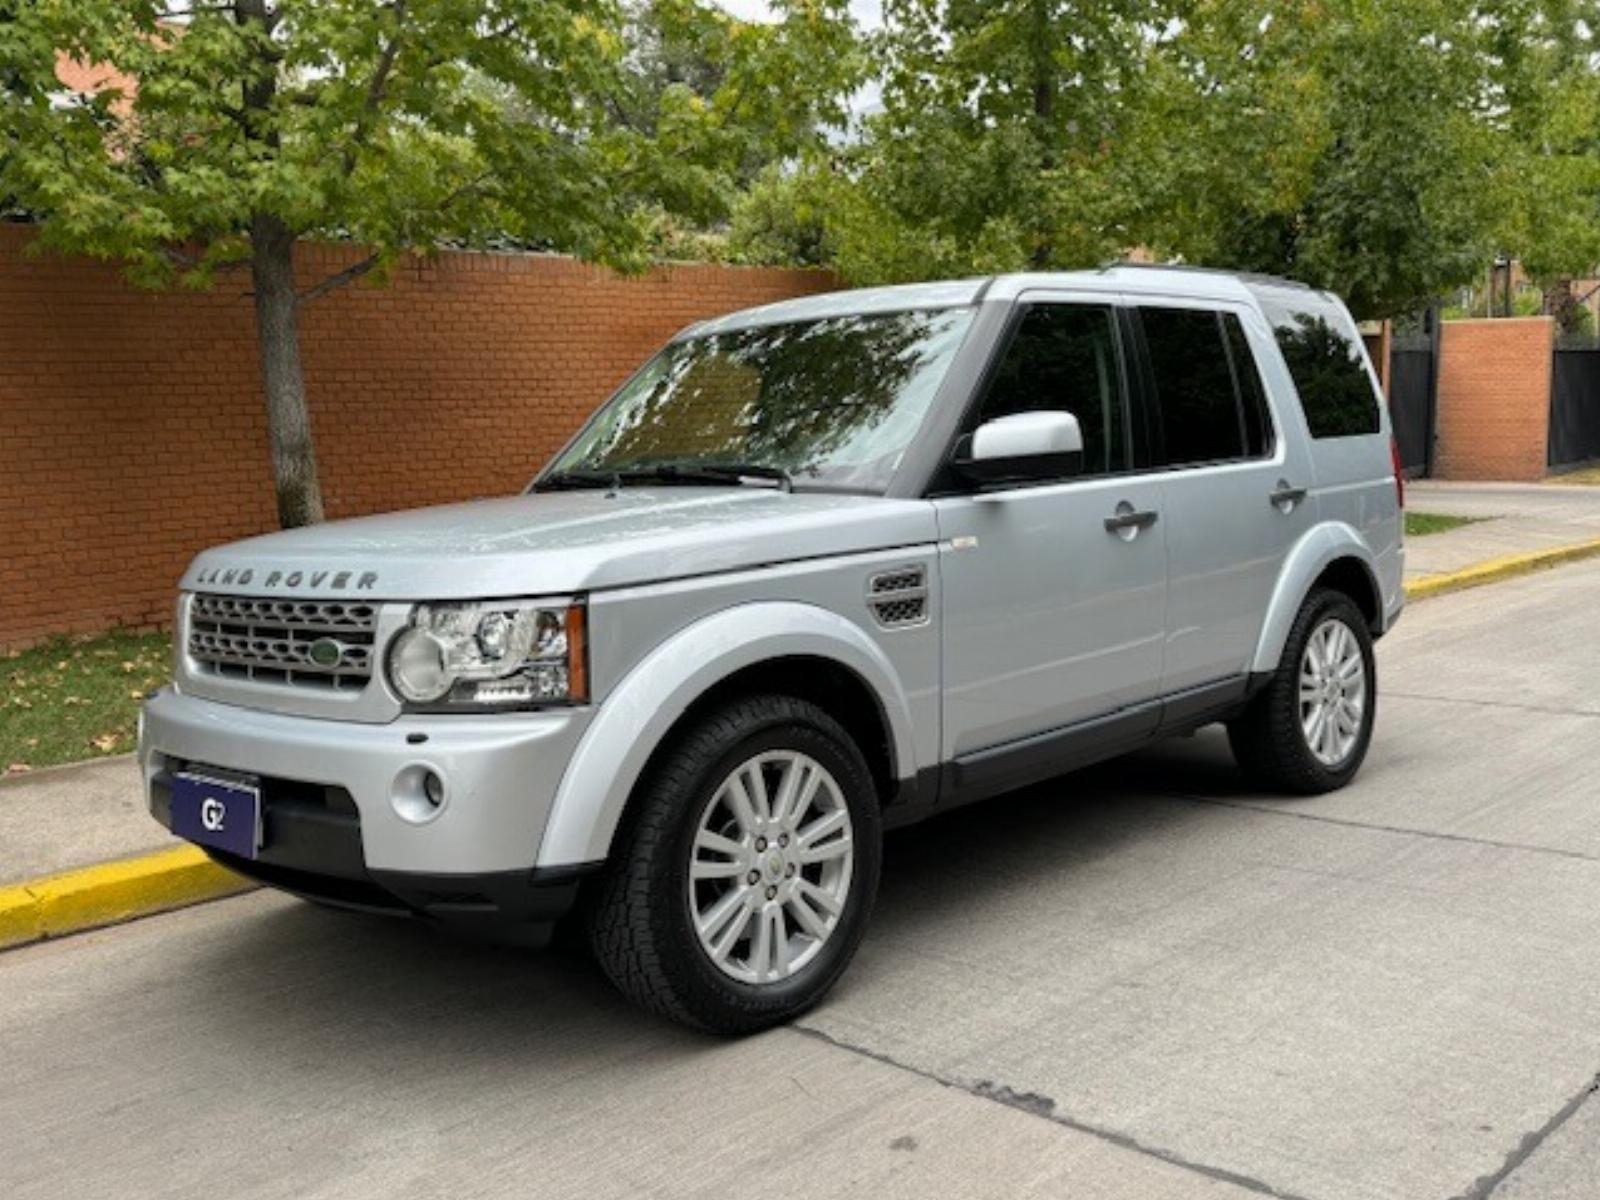 LAND ROVER DISCOVERY HSE 3.0 Diesel 2010 Un solo dueño - G2 AUTOMOVILES